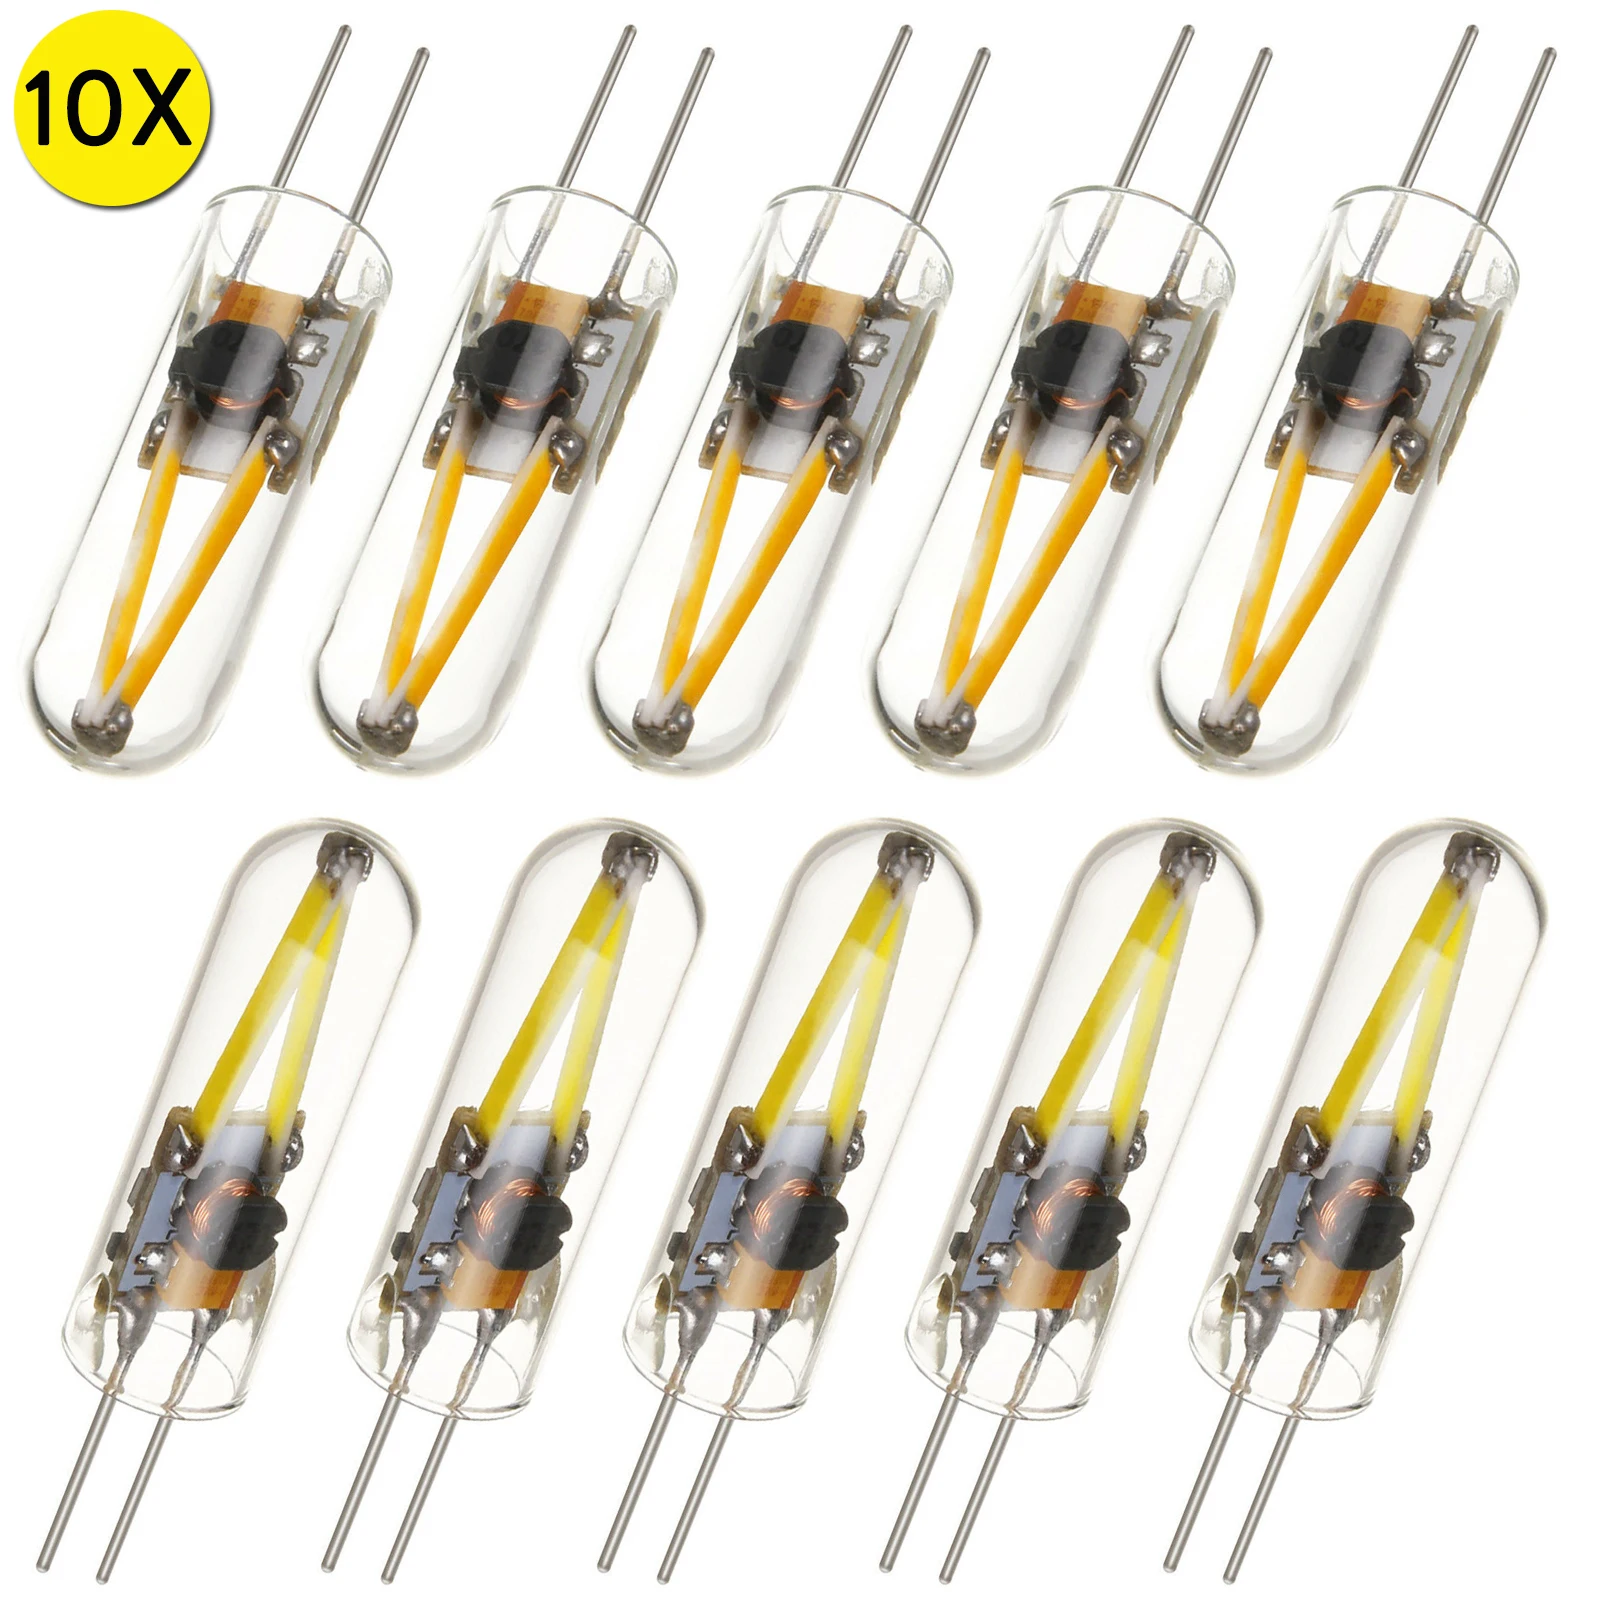 10Pcs Mini G4 LED Light Bulbs AC/DC 12V COB Filament Glass Cover Candle Lamp 3W for Home Living Room Replace Chandelier Halogen